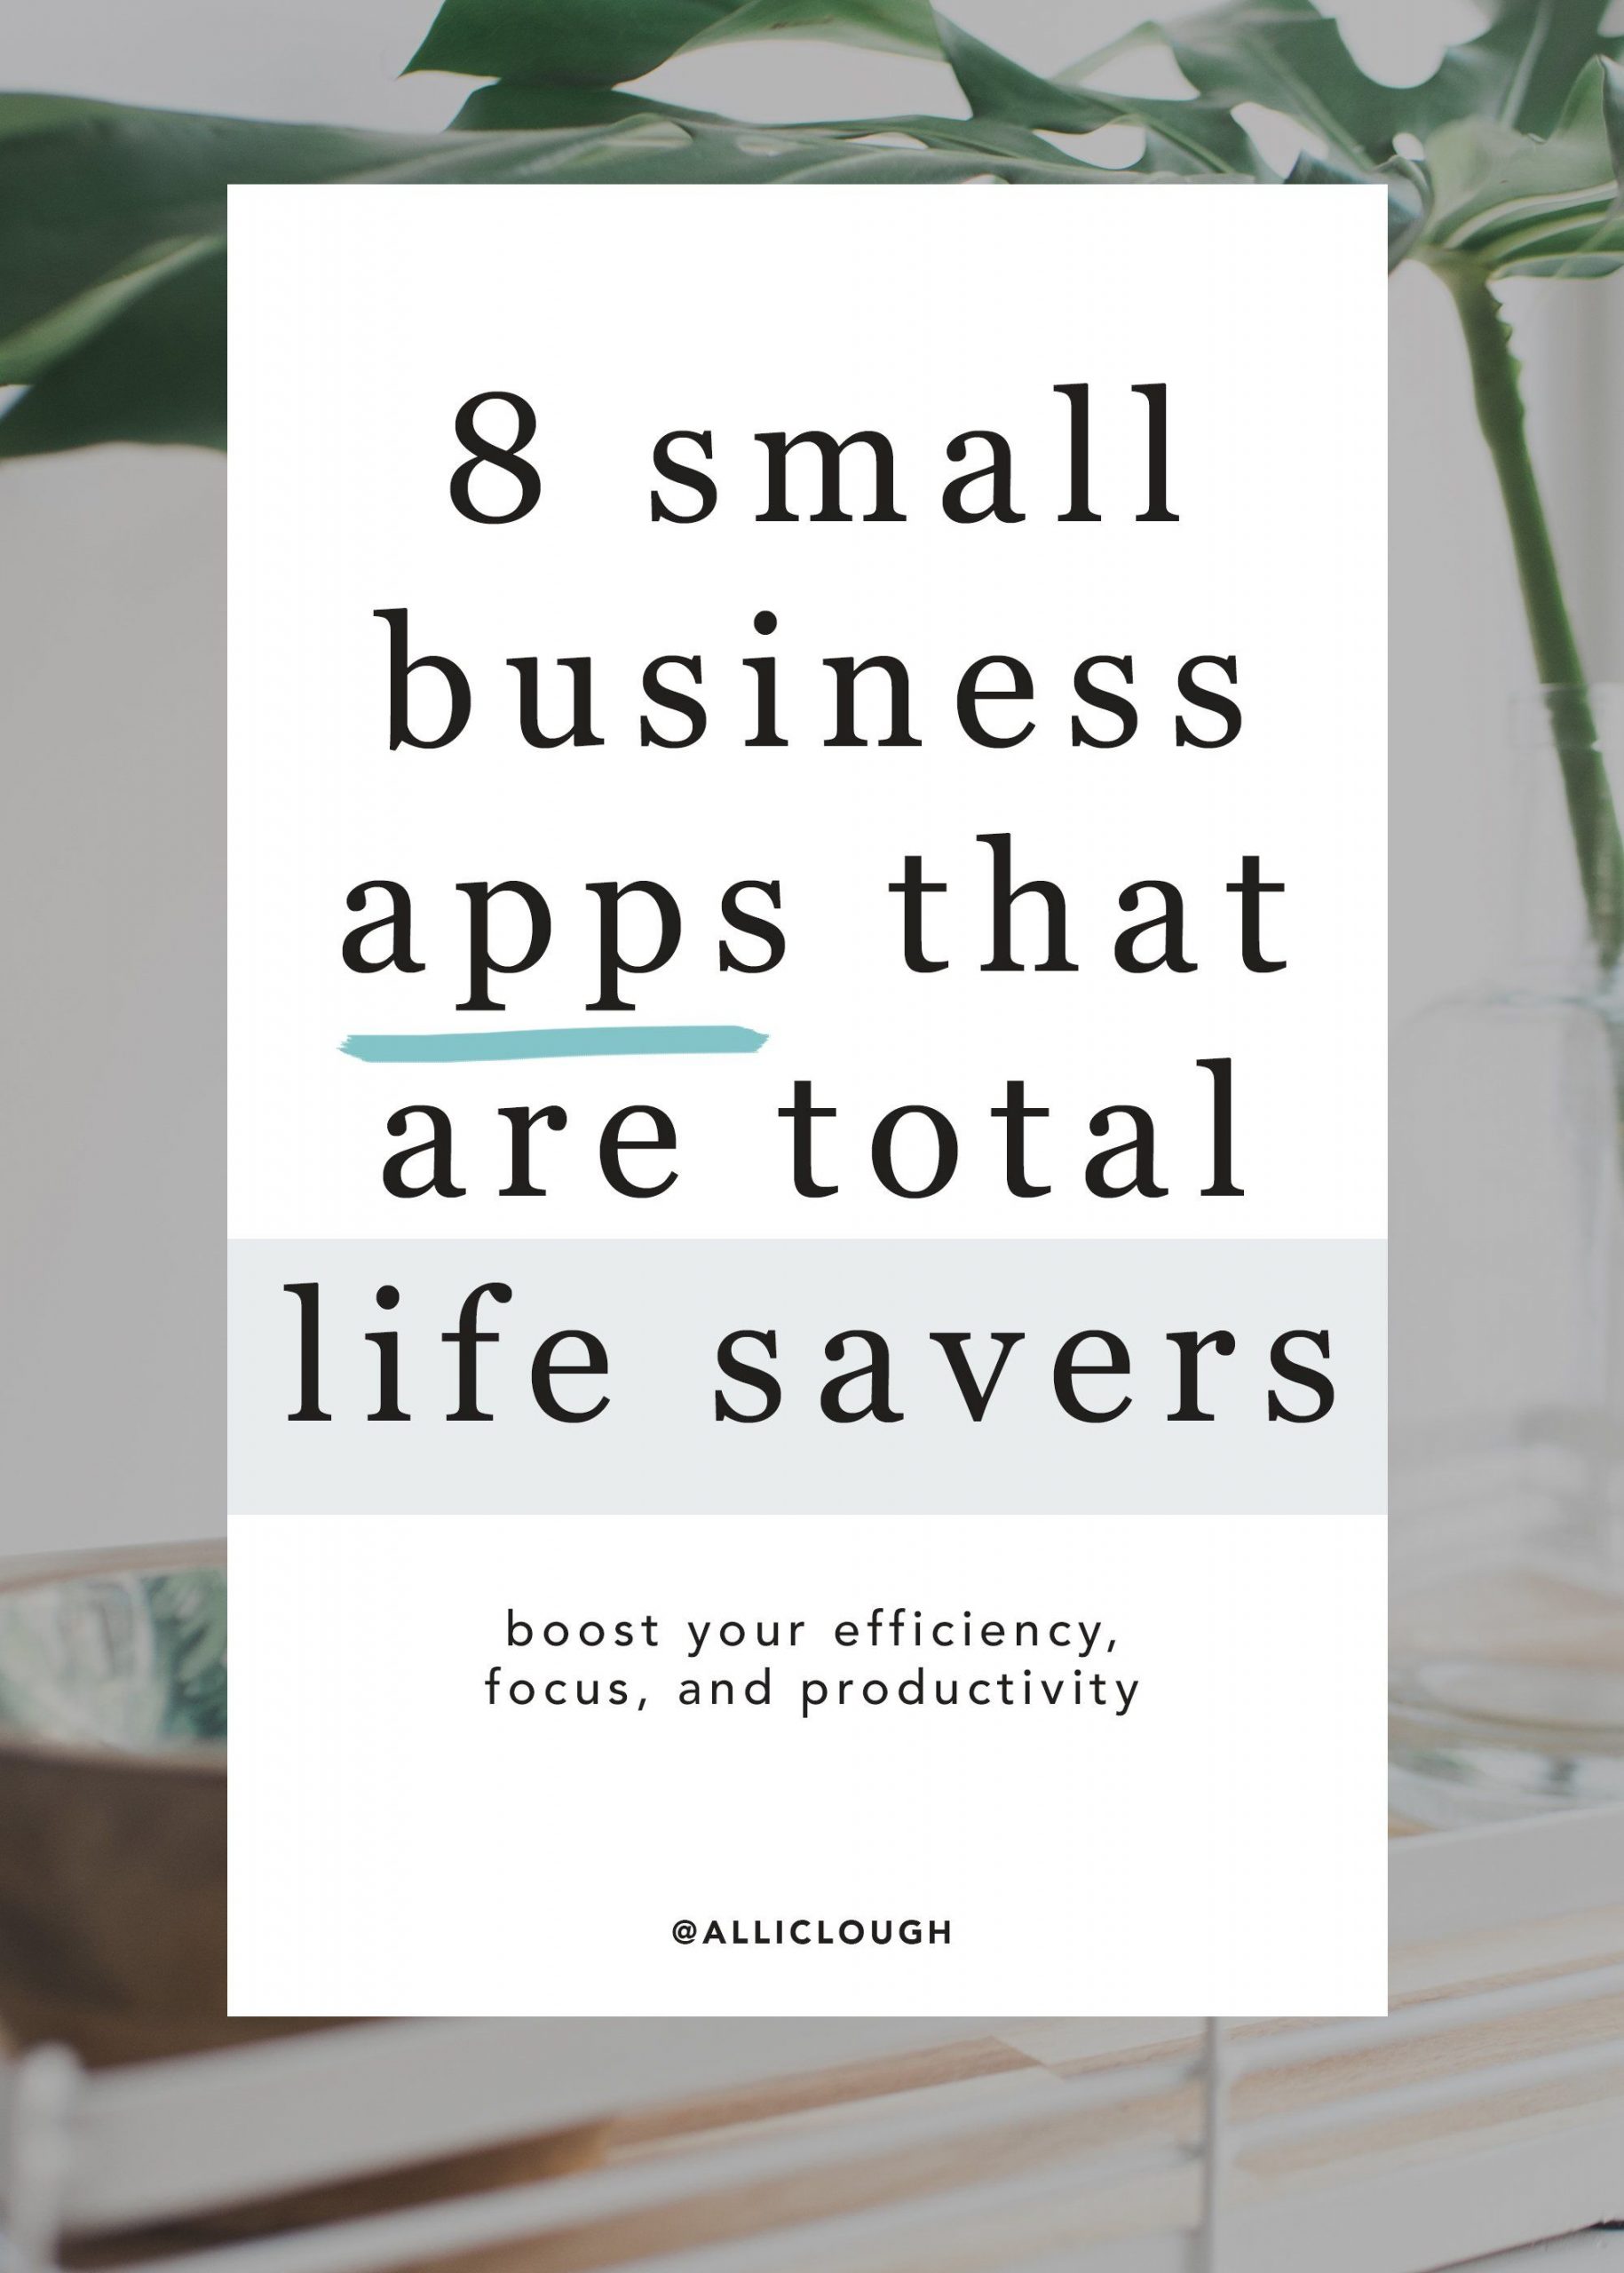 36283ee80673a6b46c23a7ecc0a927a8 scaled - 8 Small Business Apps That Are Total Life Savers - work-from-home